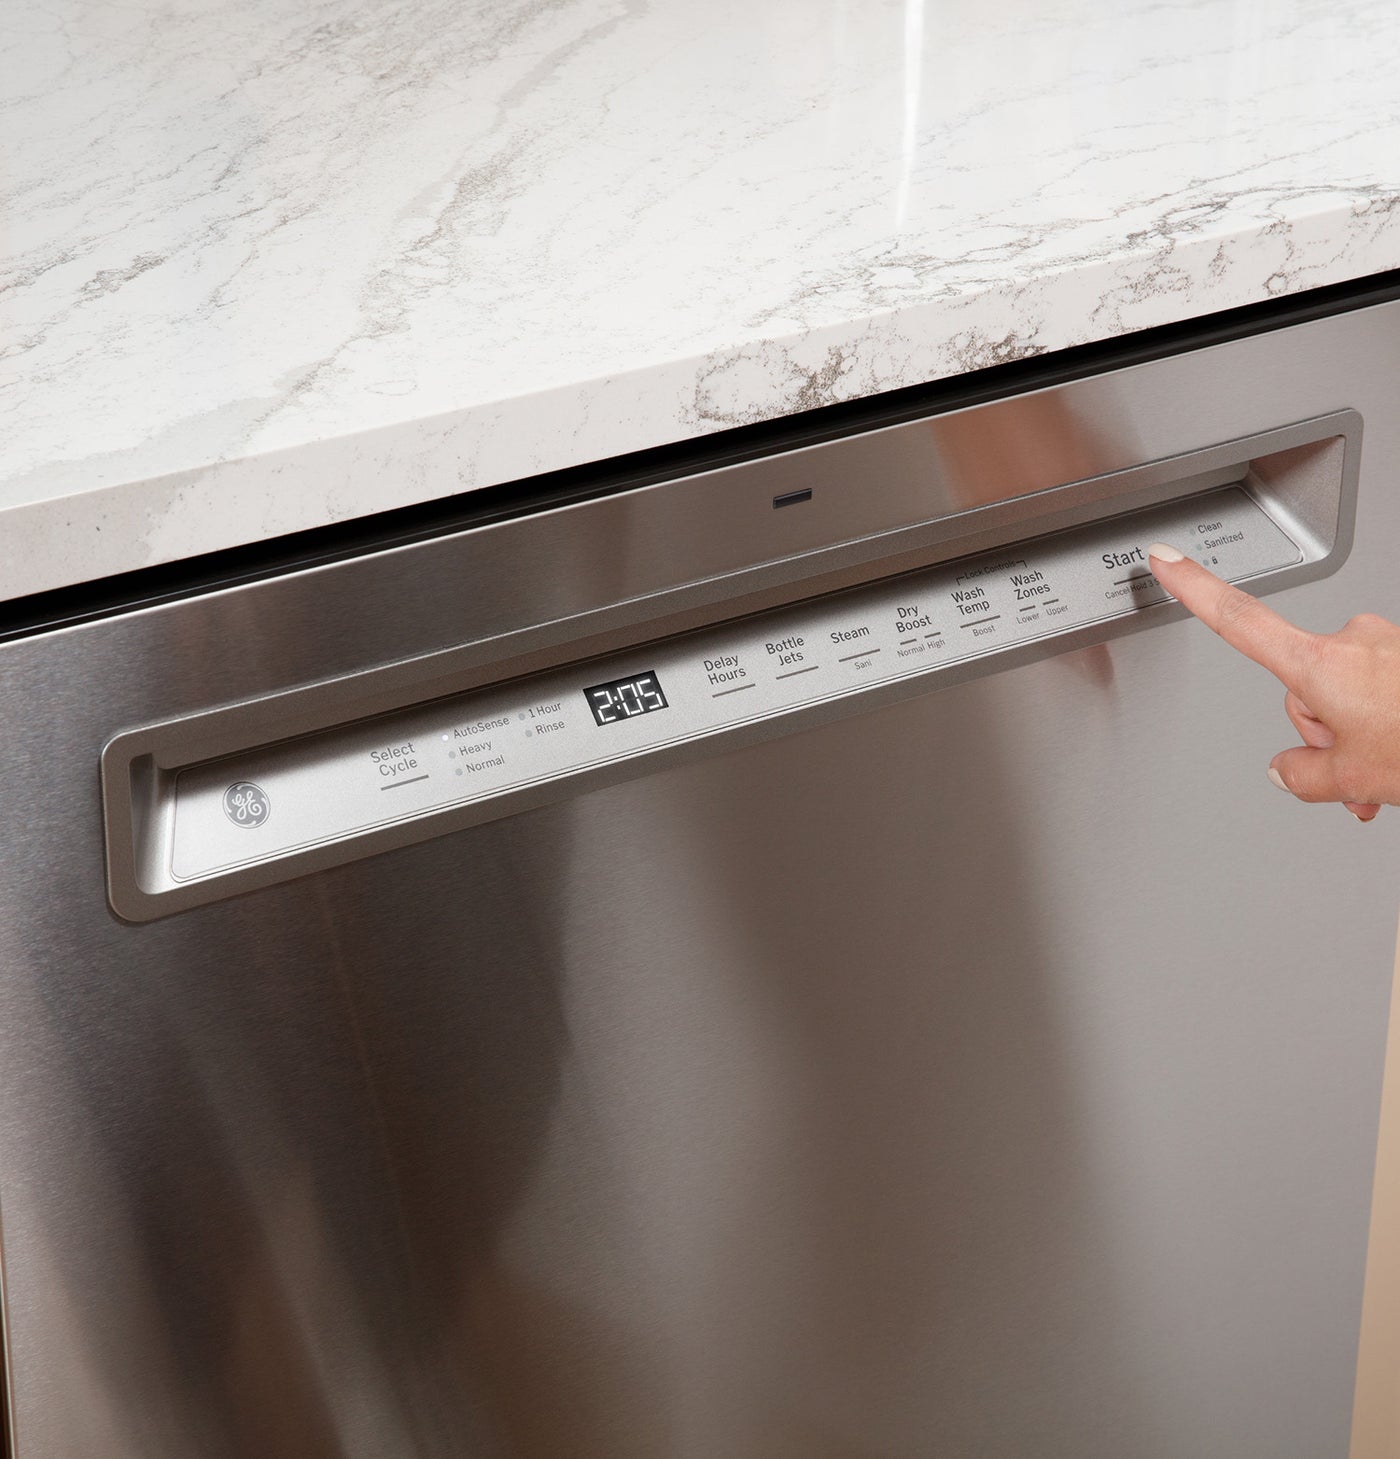 GE 24" Fingerprint Resistant Stainless Steel Dishwasher with Stainless Steel Interior and Third Rack- GDF650SYVFS